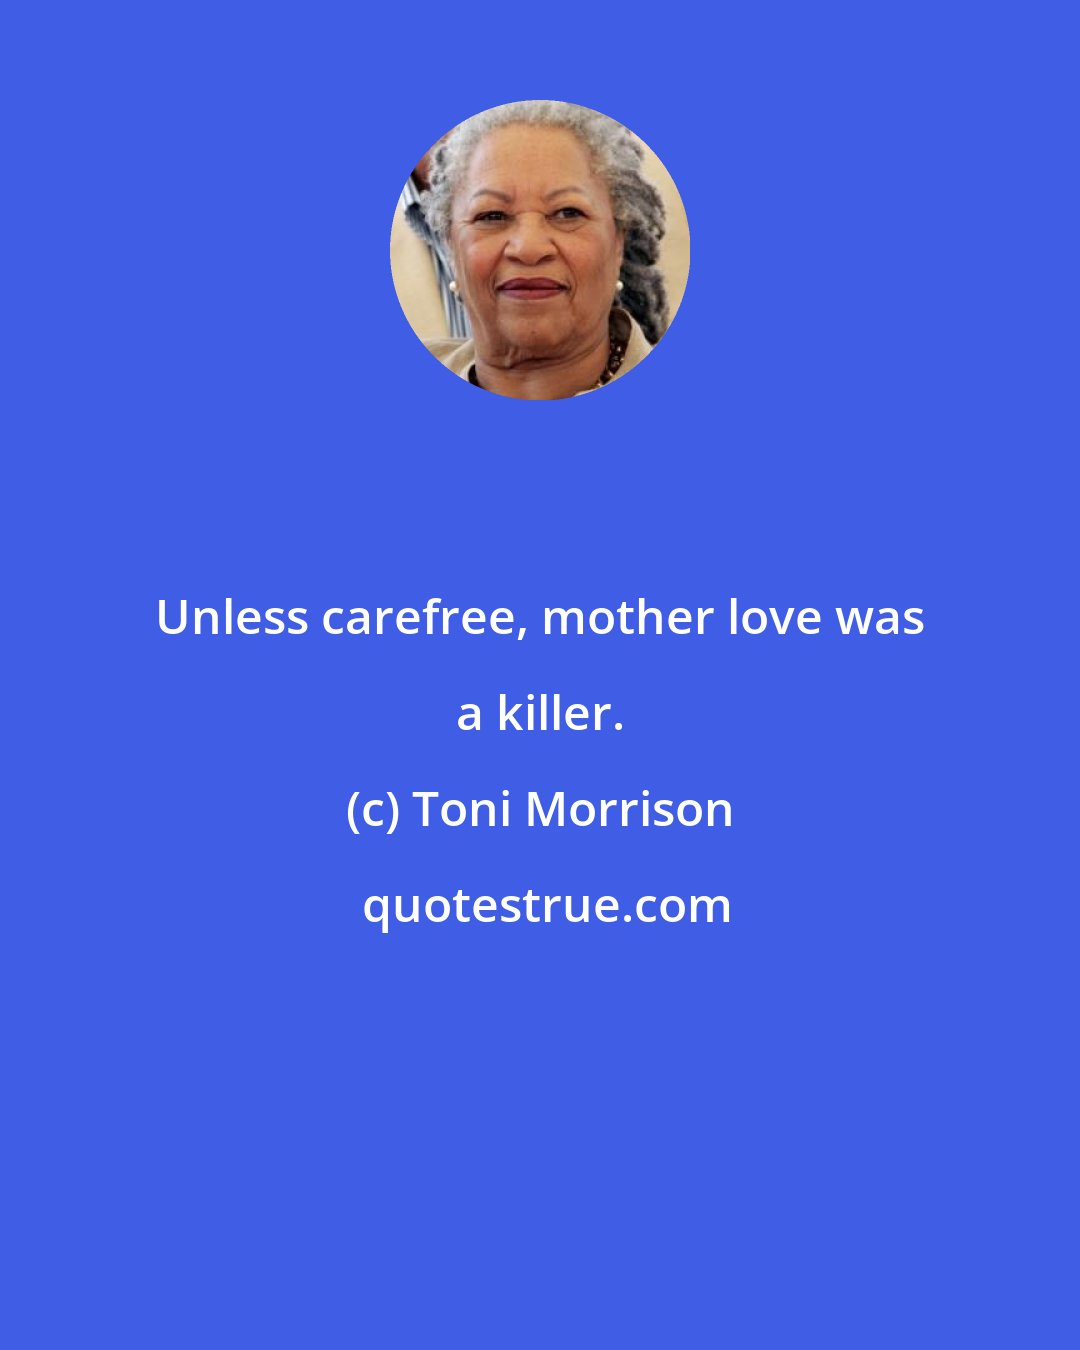 Toni Morrison: Unless carefree, mother love was a killer.